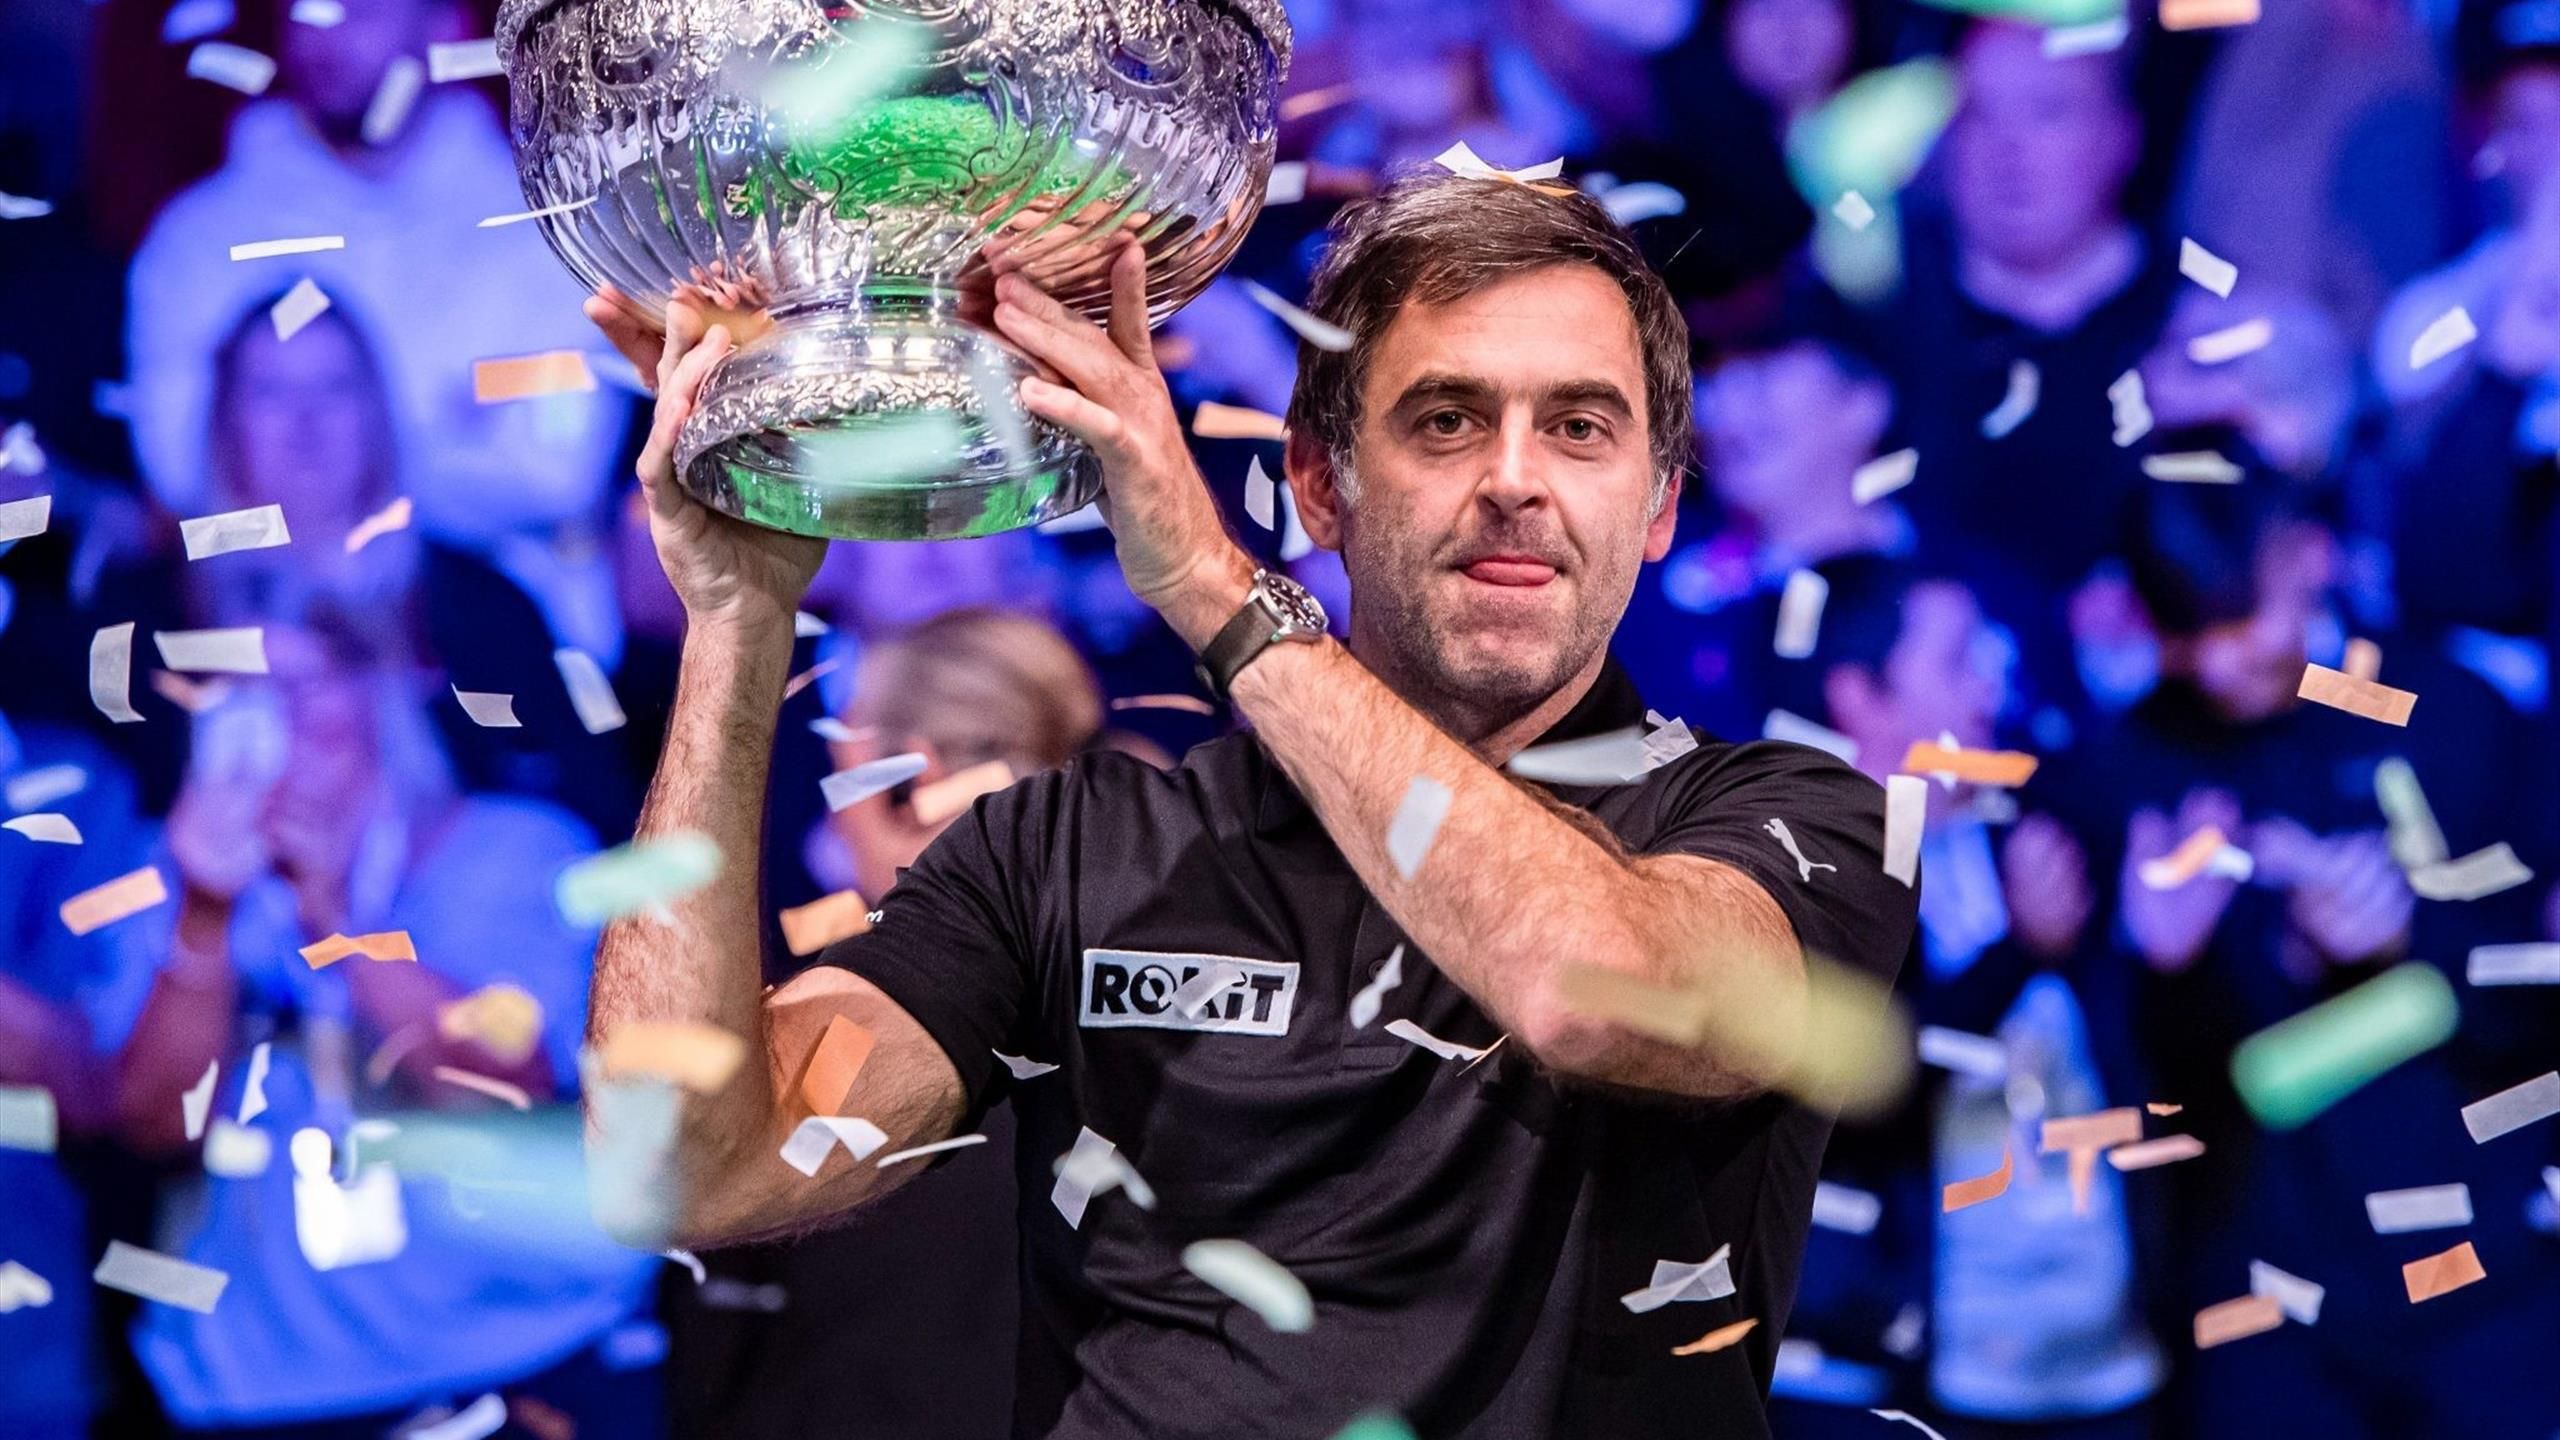 World Snooker Championship 2023 Odds: Here are the 10 players the bookies  think have the best chance of lifting the trophy - including Ronnie  O'Sullivan